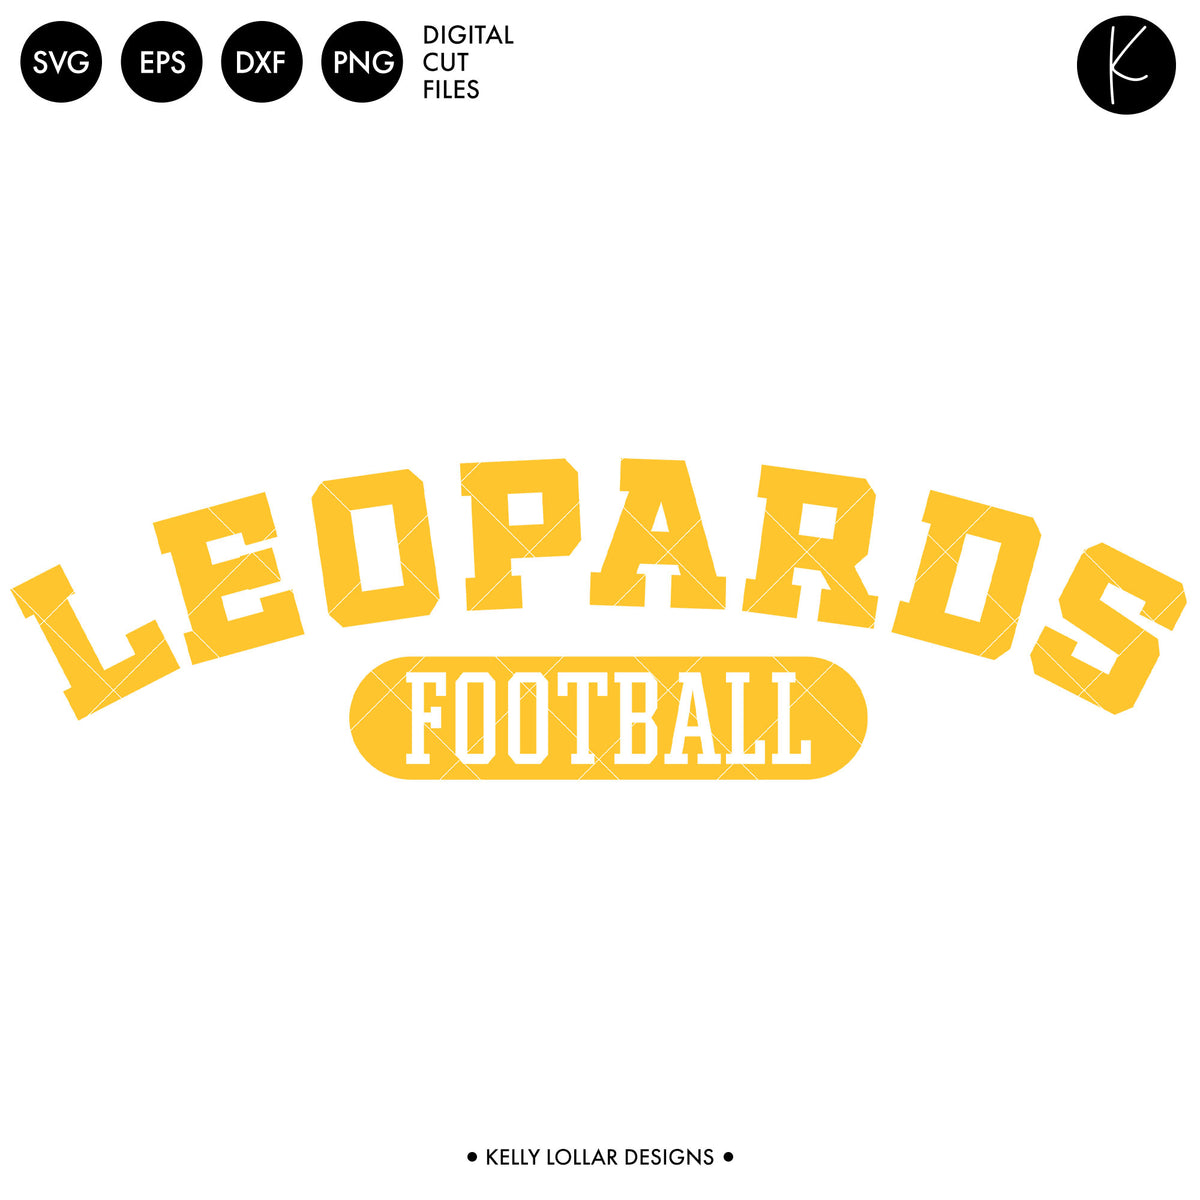 Leopards Soccer and Football Bundle | SVG DXF EPS PNG Cut Files